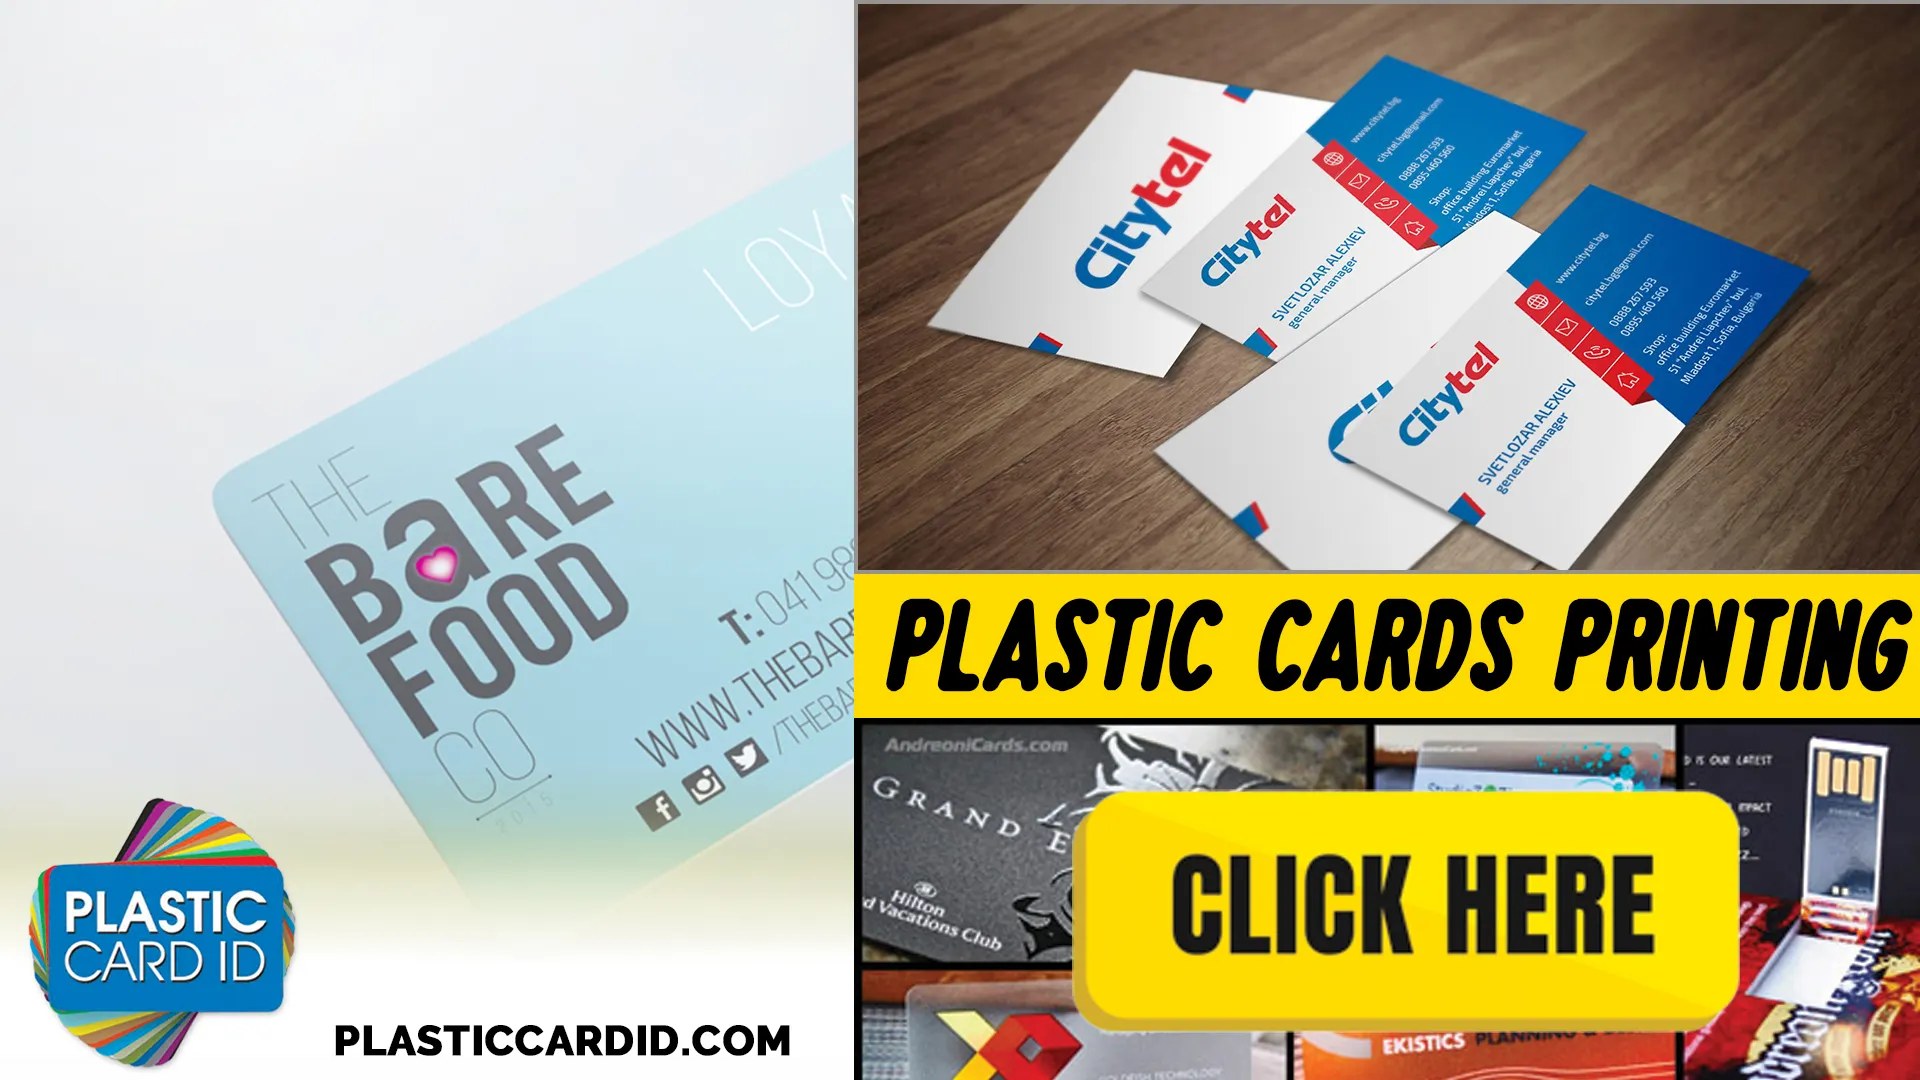 Welcome to the World of Professional Card Handling with Plastic Card ID




